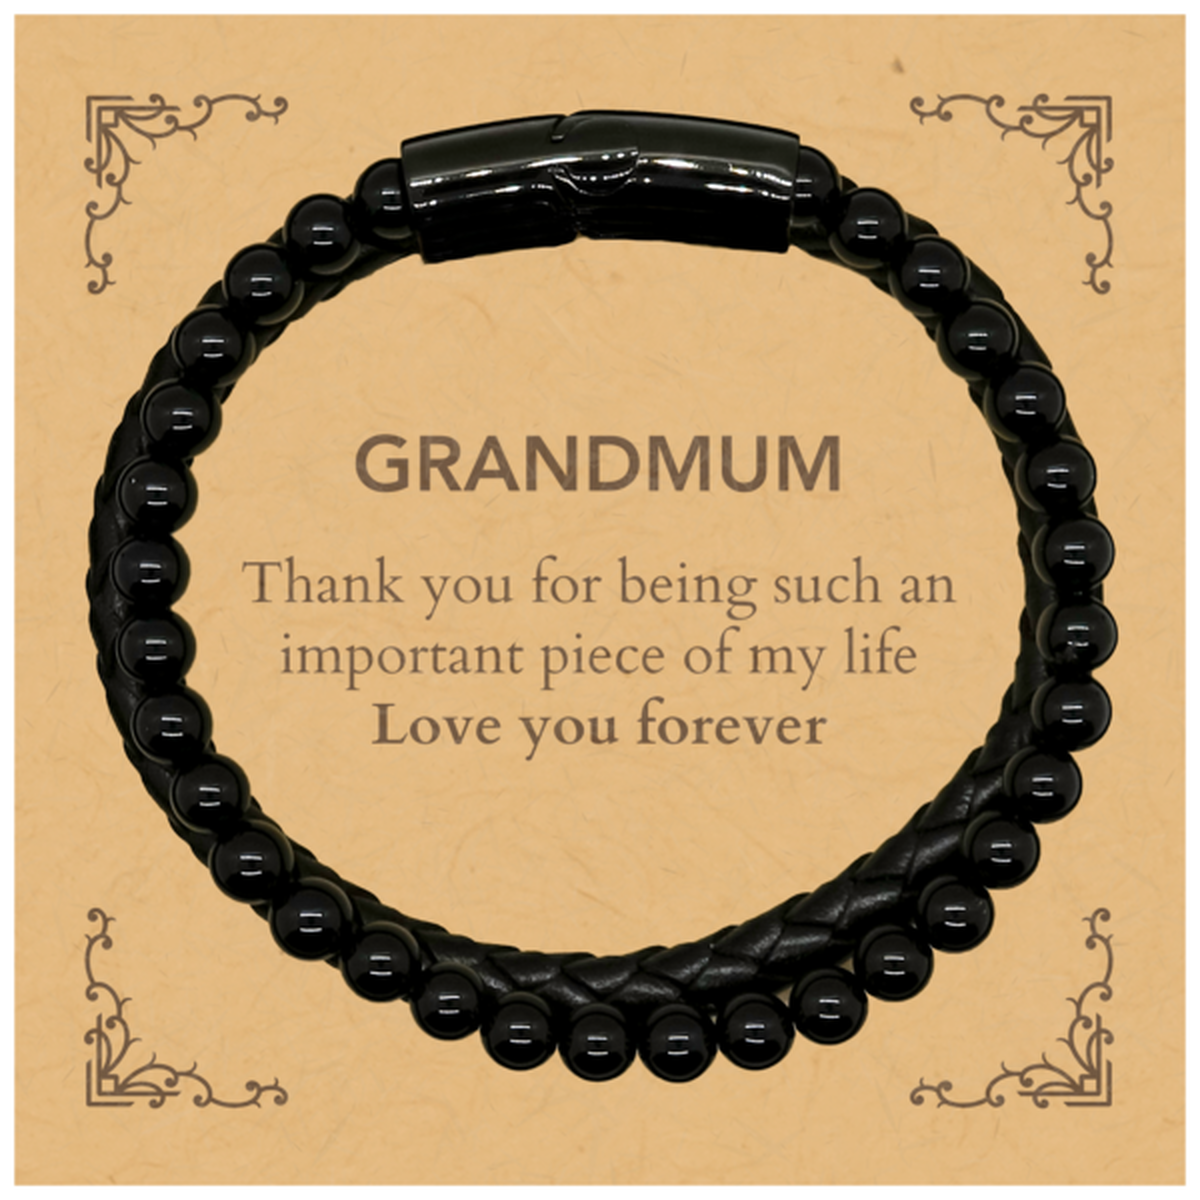 Appropriate Grandmum Stone Leather Bracelets Epic Birthday Gifts for Grandmum Thank you for being such an important piece of my life Grandmum Christmas Mothers Fathers Day